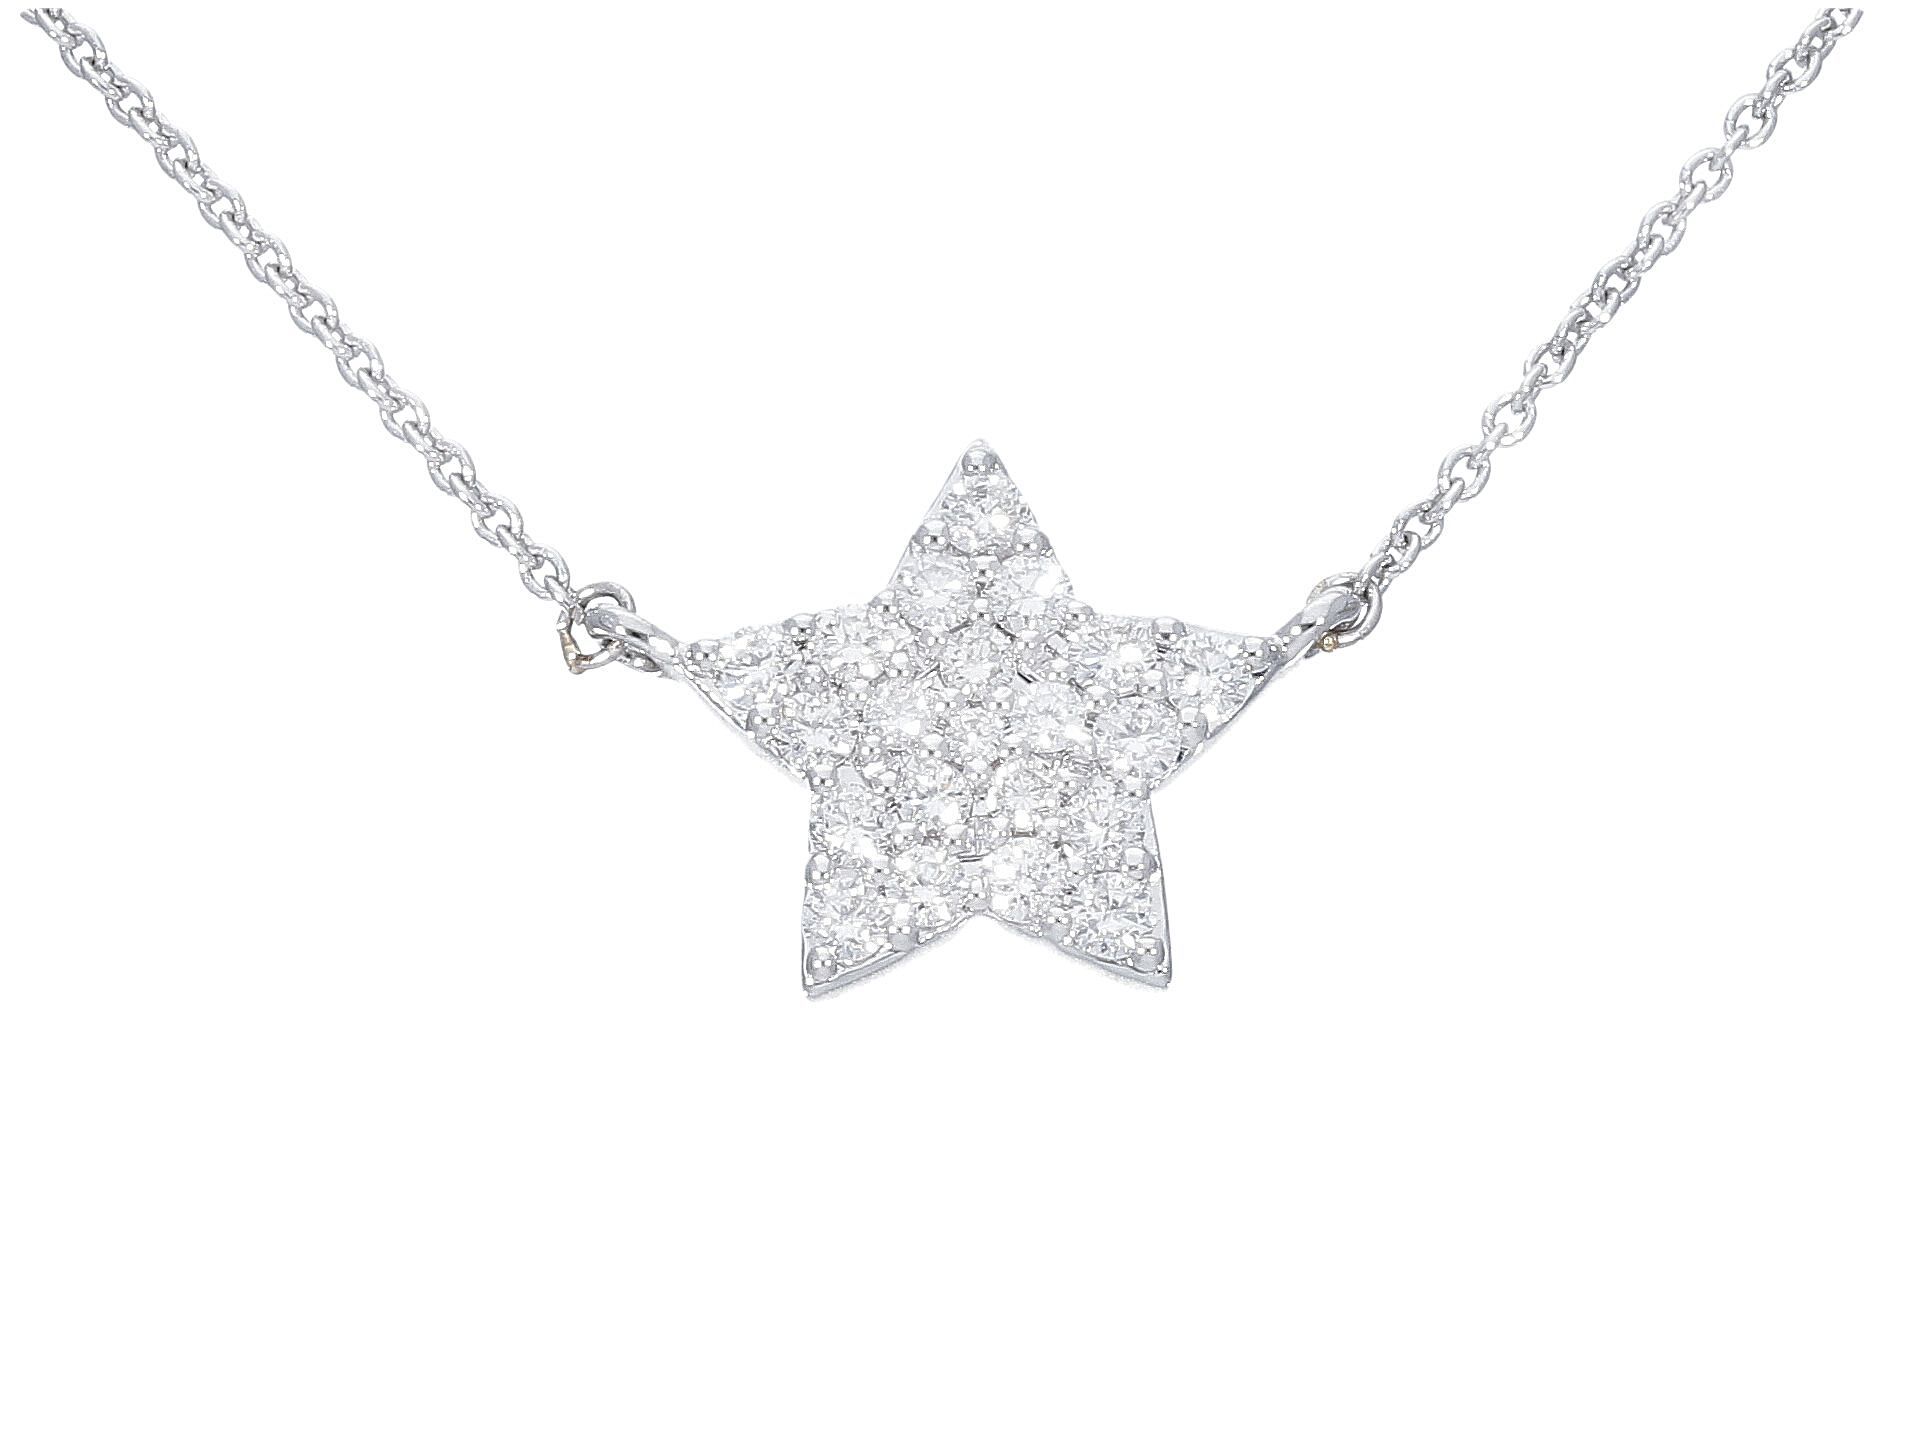  White gold necklace k18 with diamonds (code S230410)